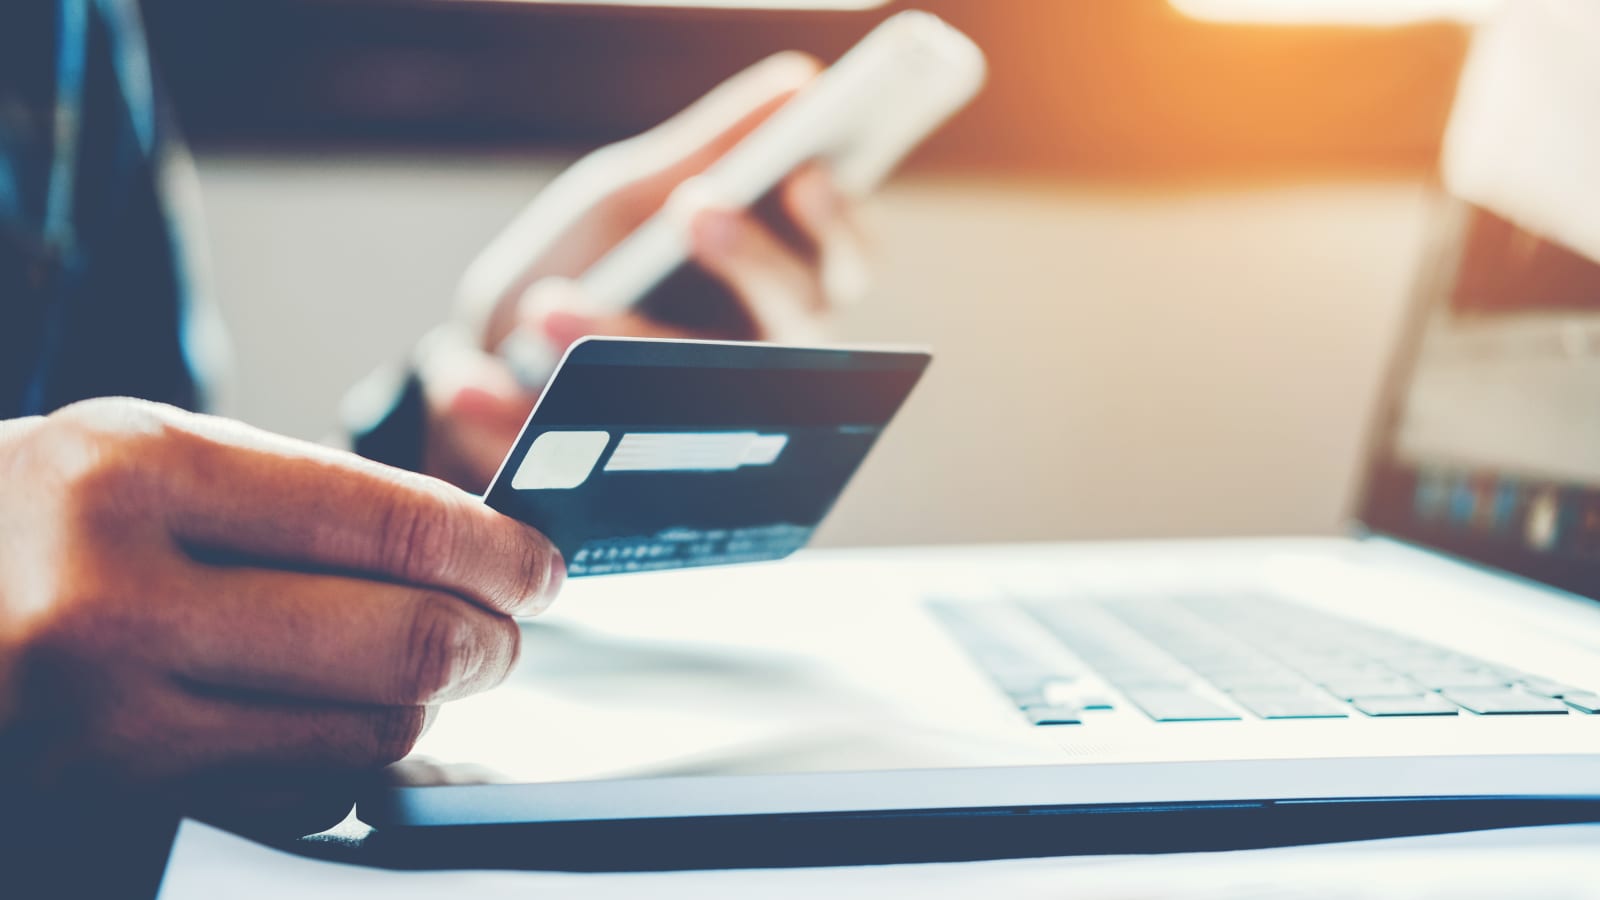 Top 10 common credit card mistakes and how to avoid them